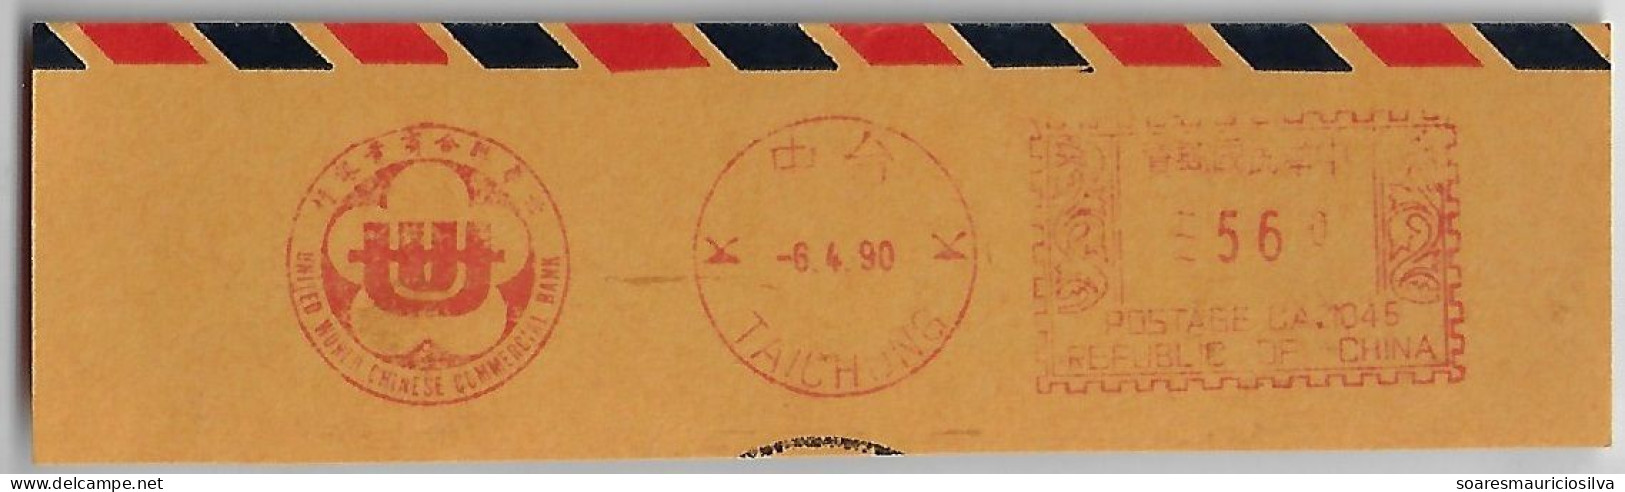 Taiwan 1990 Fragment Meter Stamp Pitney Bowes Slogan United World Chinese Commercial Bank Taichung Flower Plum Blossom - Brieven En Documenten